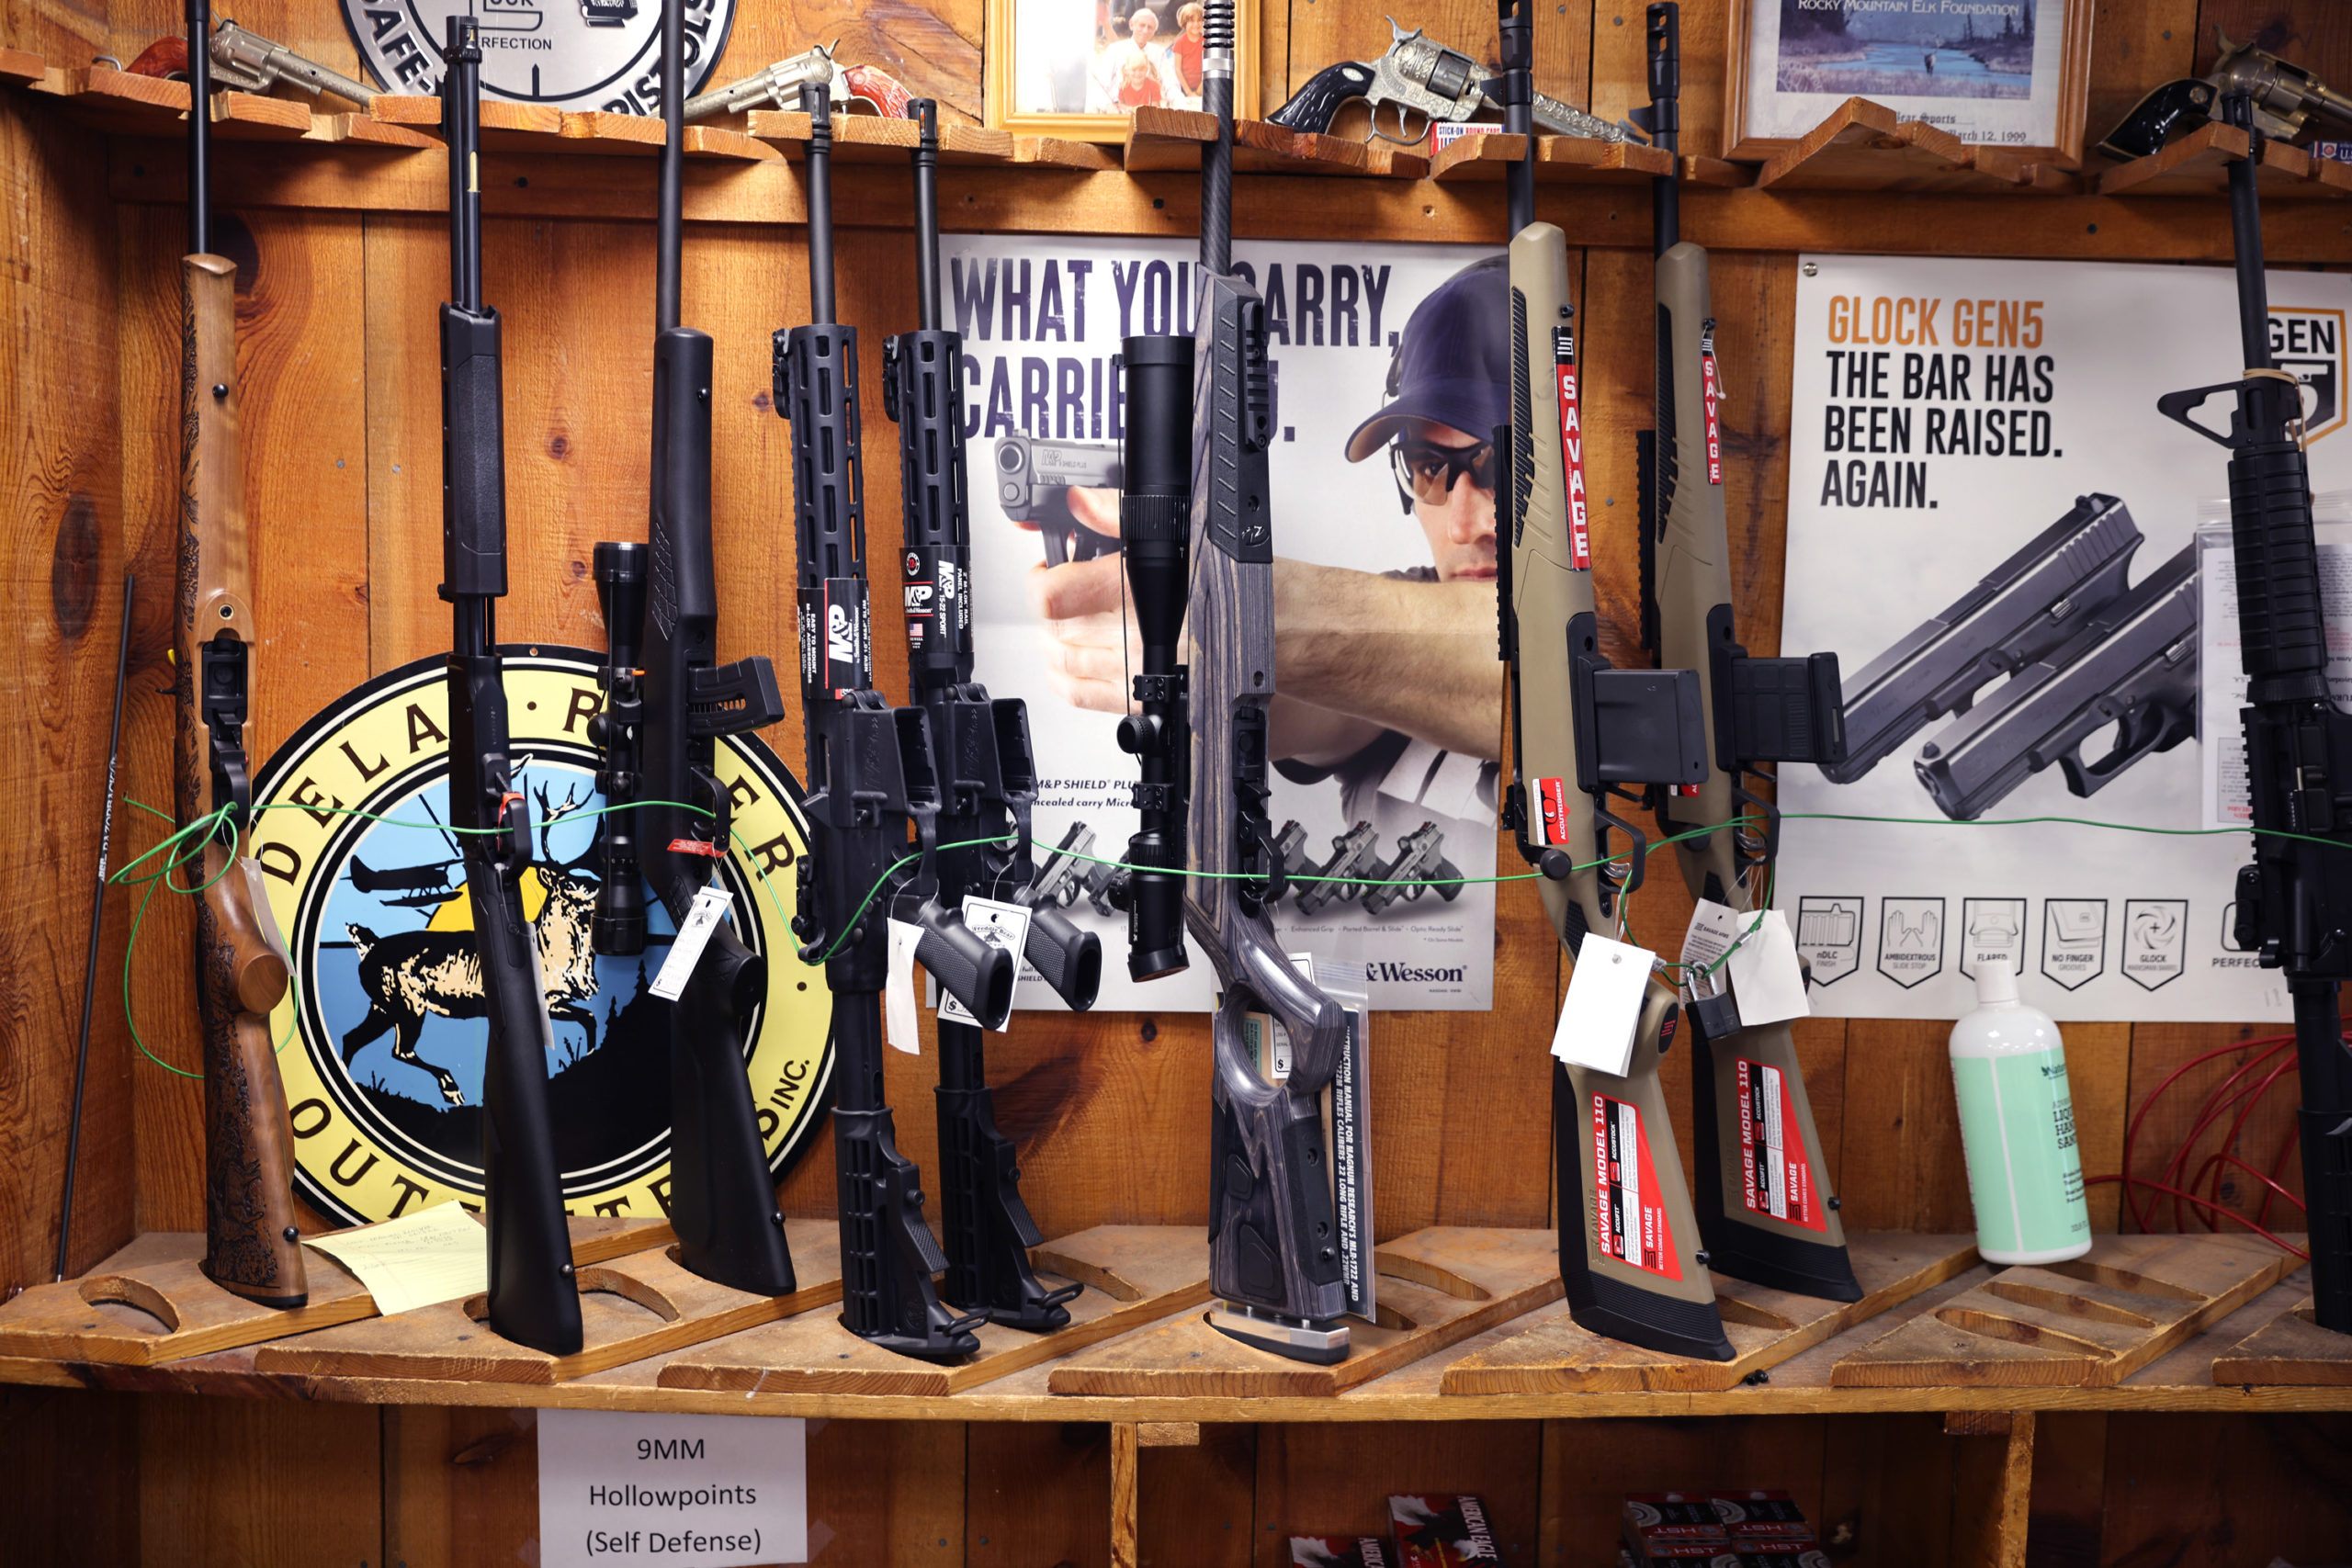 TINLEY PARK, ILLINOIS - APRIL 08: Rifles are offered for sale at Freddie Bear Sports on April 08, 2021 in Tinley Park, Illinois. President Joe Biden today announced gun control measures which included stricter controls on the purchase of homemade firearms, commonly referred to as Ghost Guns and he made a push for national Red Flag legislation and other measures. (Photo by Scott Olson/Getty Images)